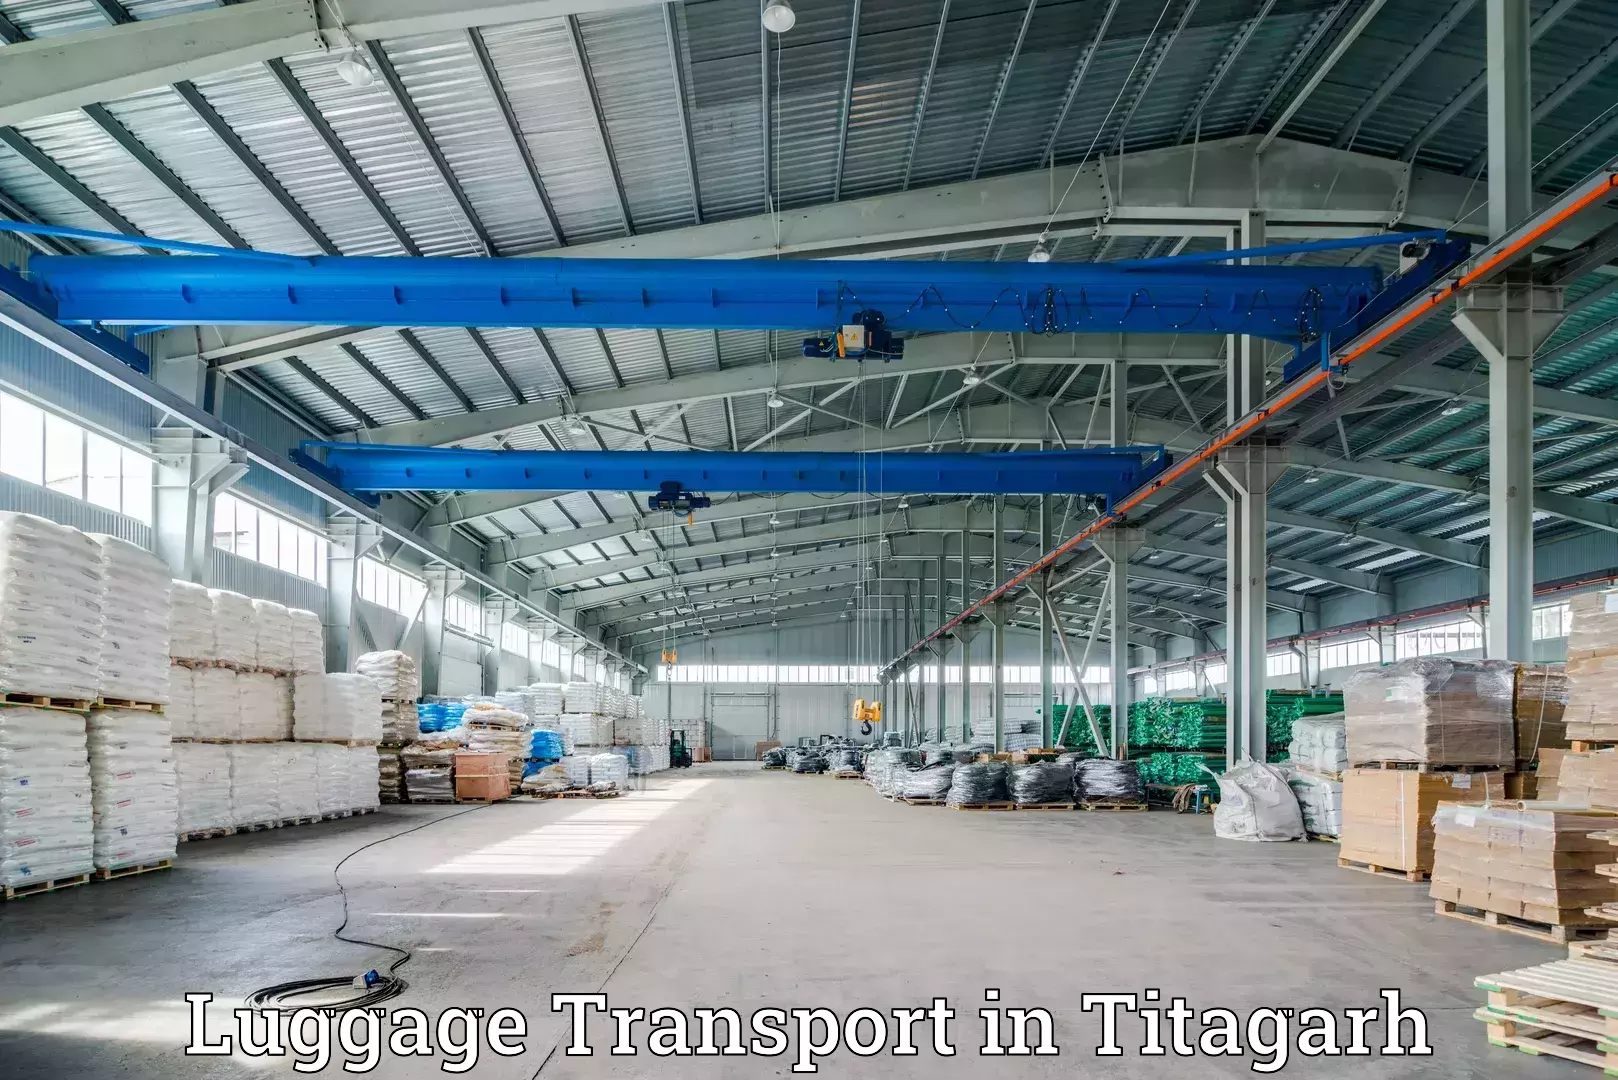 Baggage transport management in Titagarh